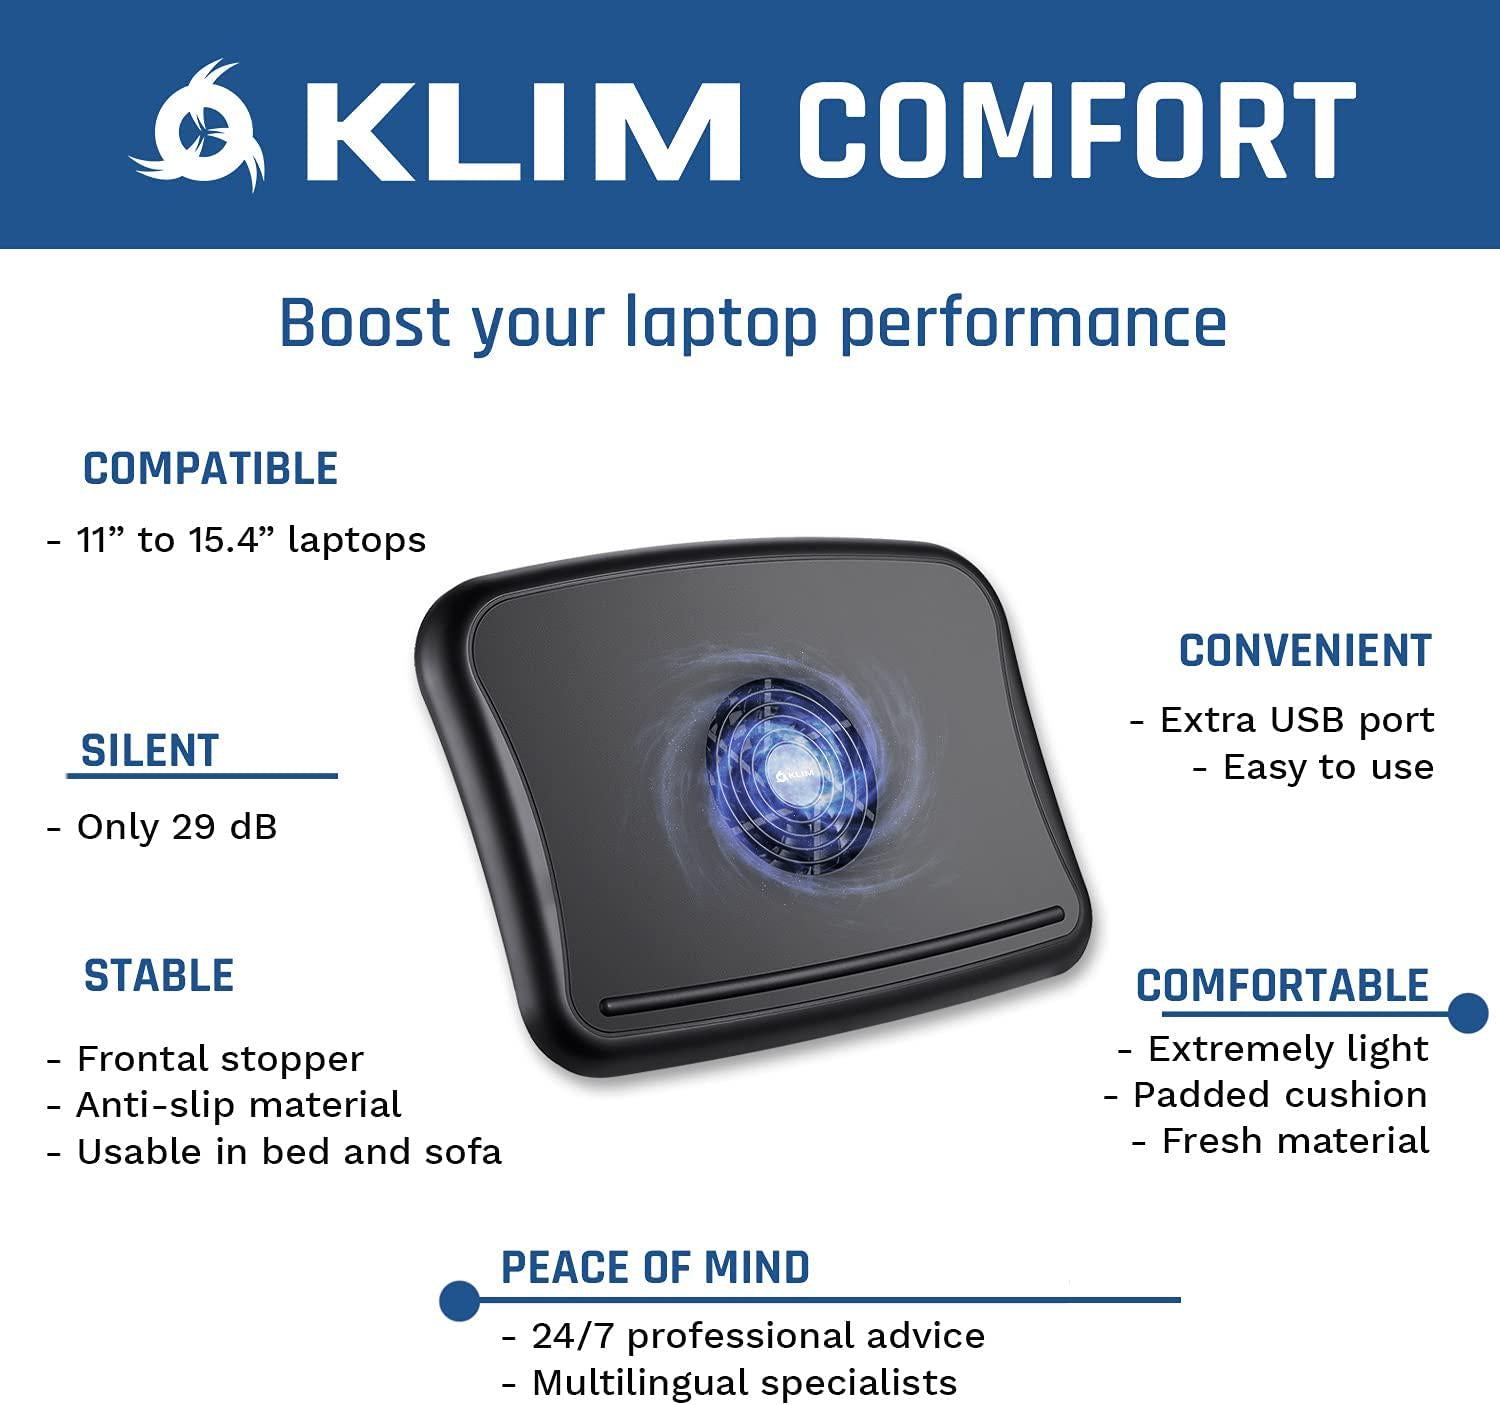 KLIM, KLIM Comfort + Laptop Cooling Pad + NEW VERSION + Protect yourself and your laptop from overheating + High Comfort Silent Laptop Cooler 10 - 15.6 + Stable on Your Laps + Laptop Cooling Tray with Fan